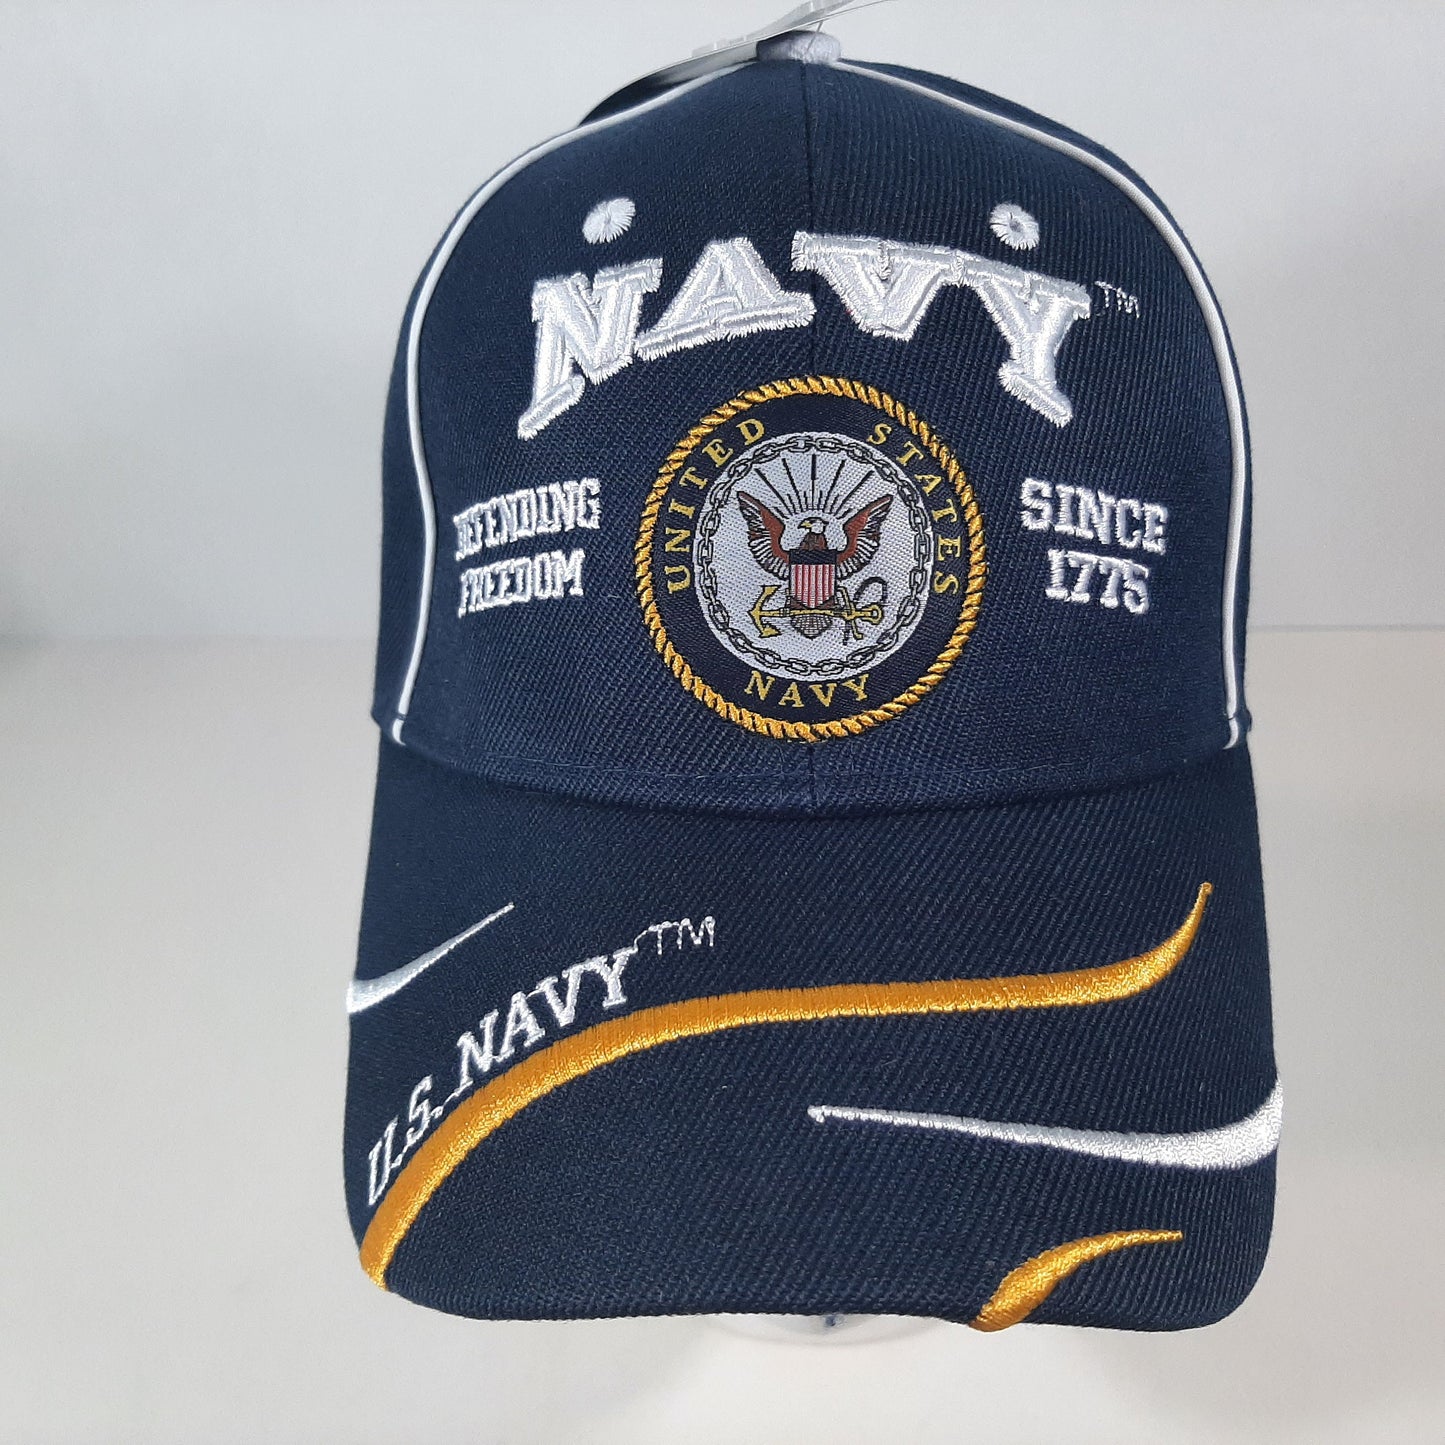 U.S. Navy Hat With Seal Defending Freedom Military Adjustable Blue Cap Fast Ship